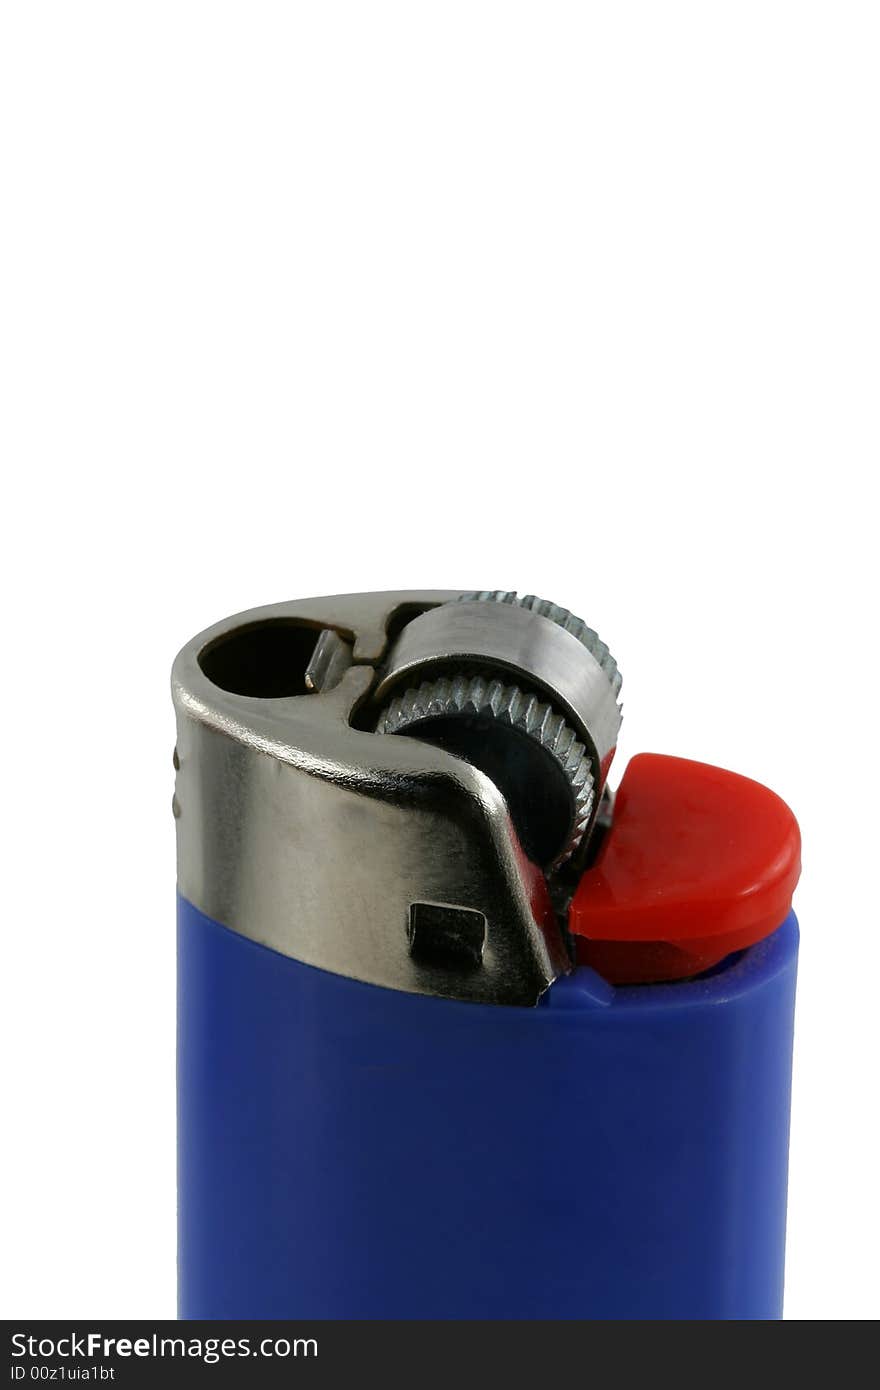 A Isolated blue cigarette lighter on white